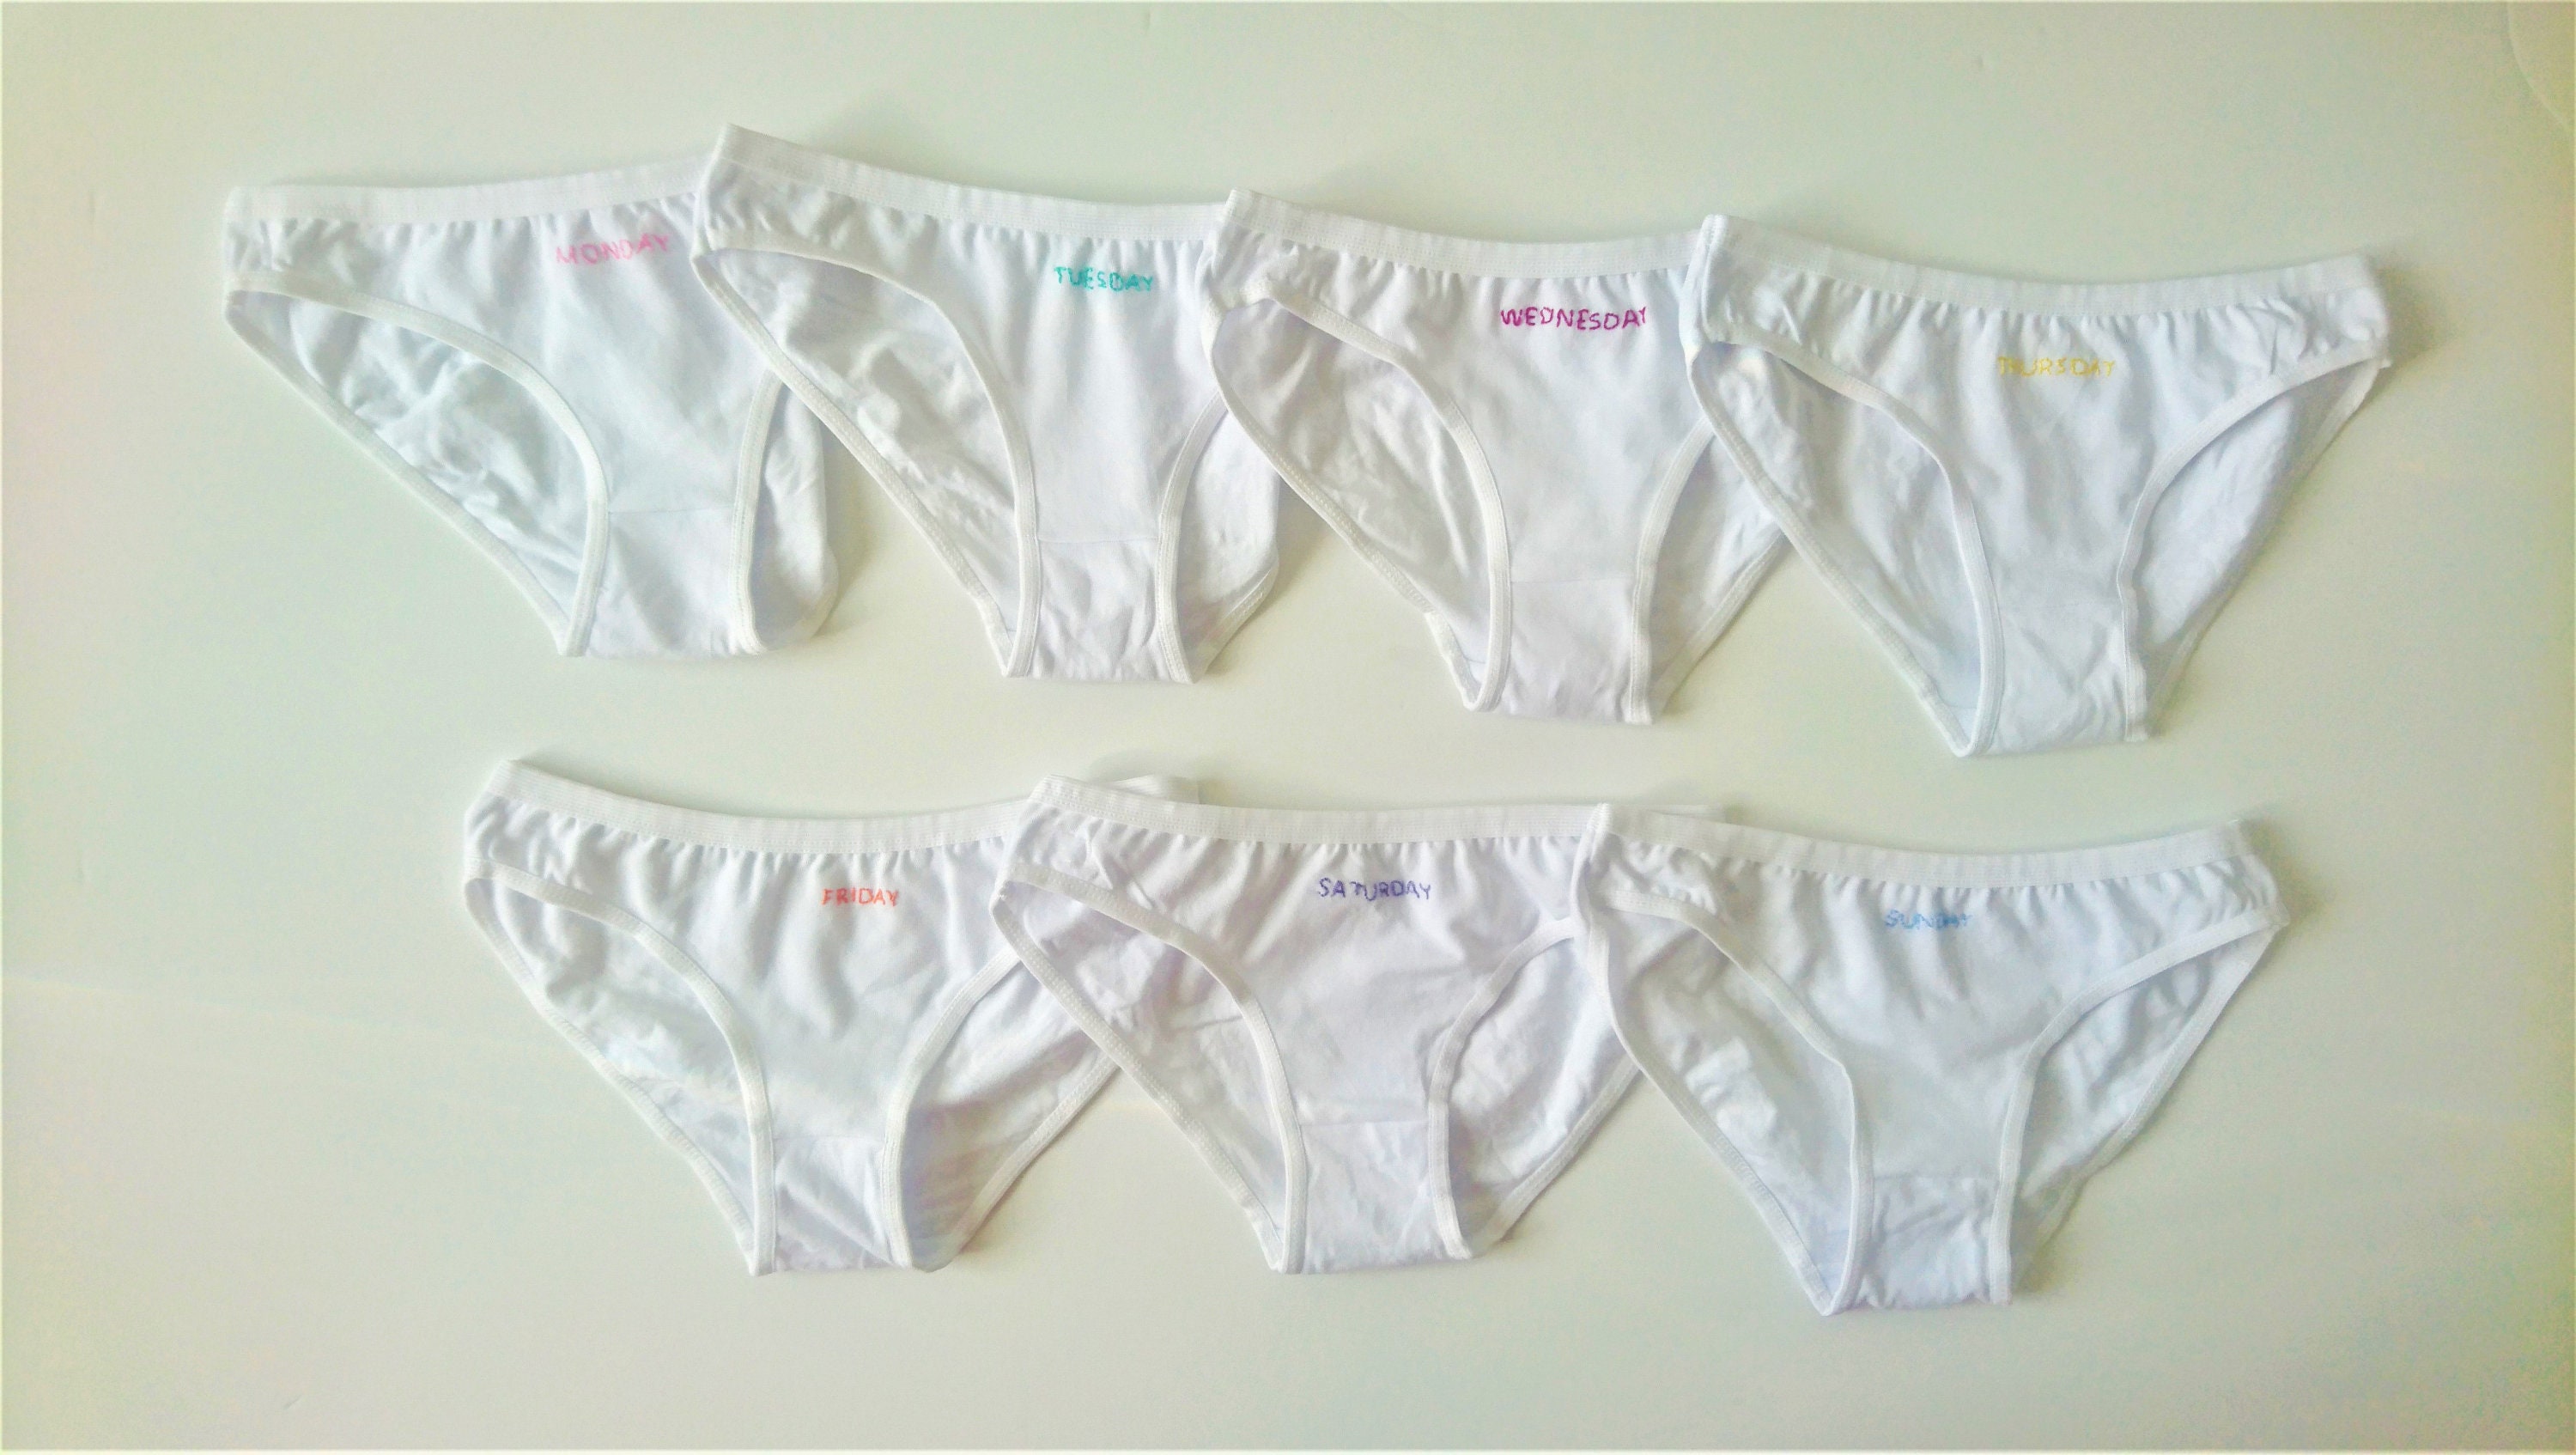 Set of Seven Days Panties Hand Embroidered Days of the Week Panties Bikini  Brazilian String White Cotton Panties Funny Underwear Made2order -   Canada